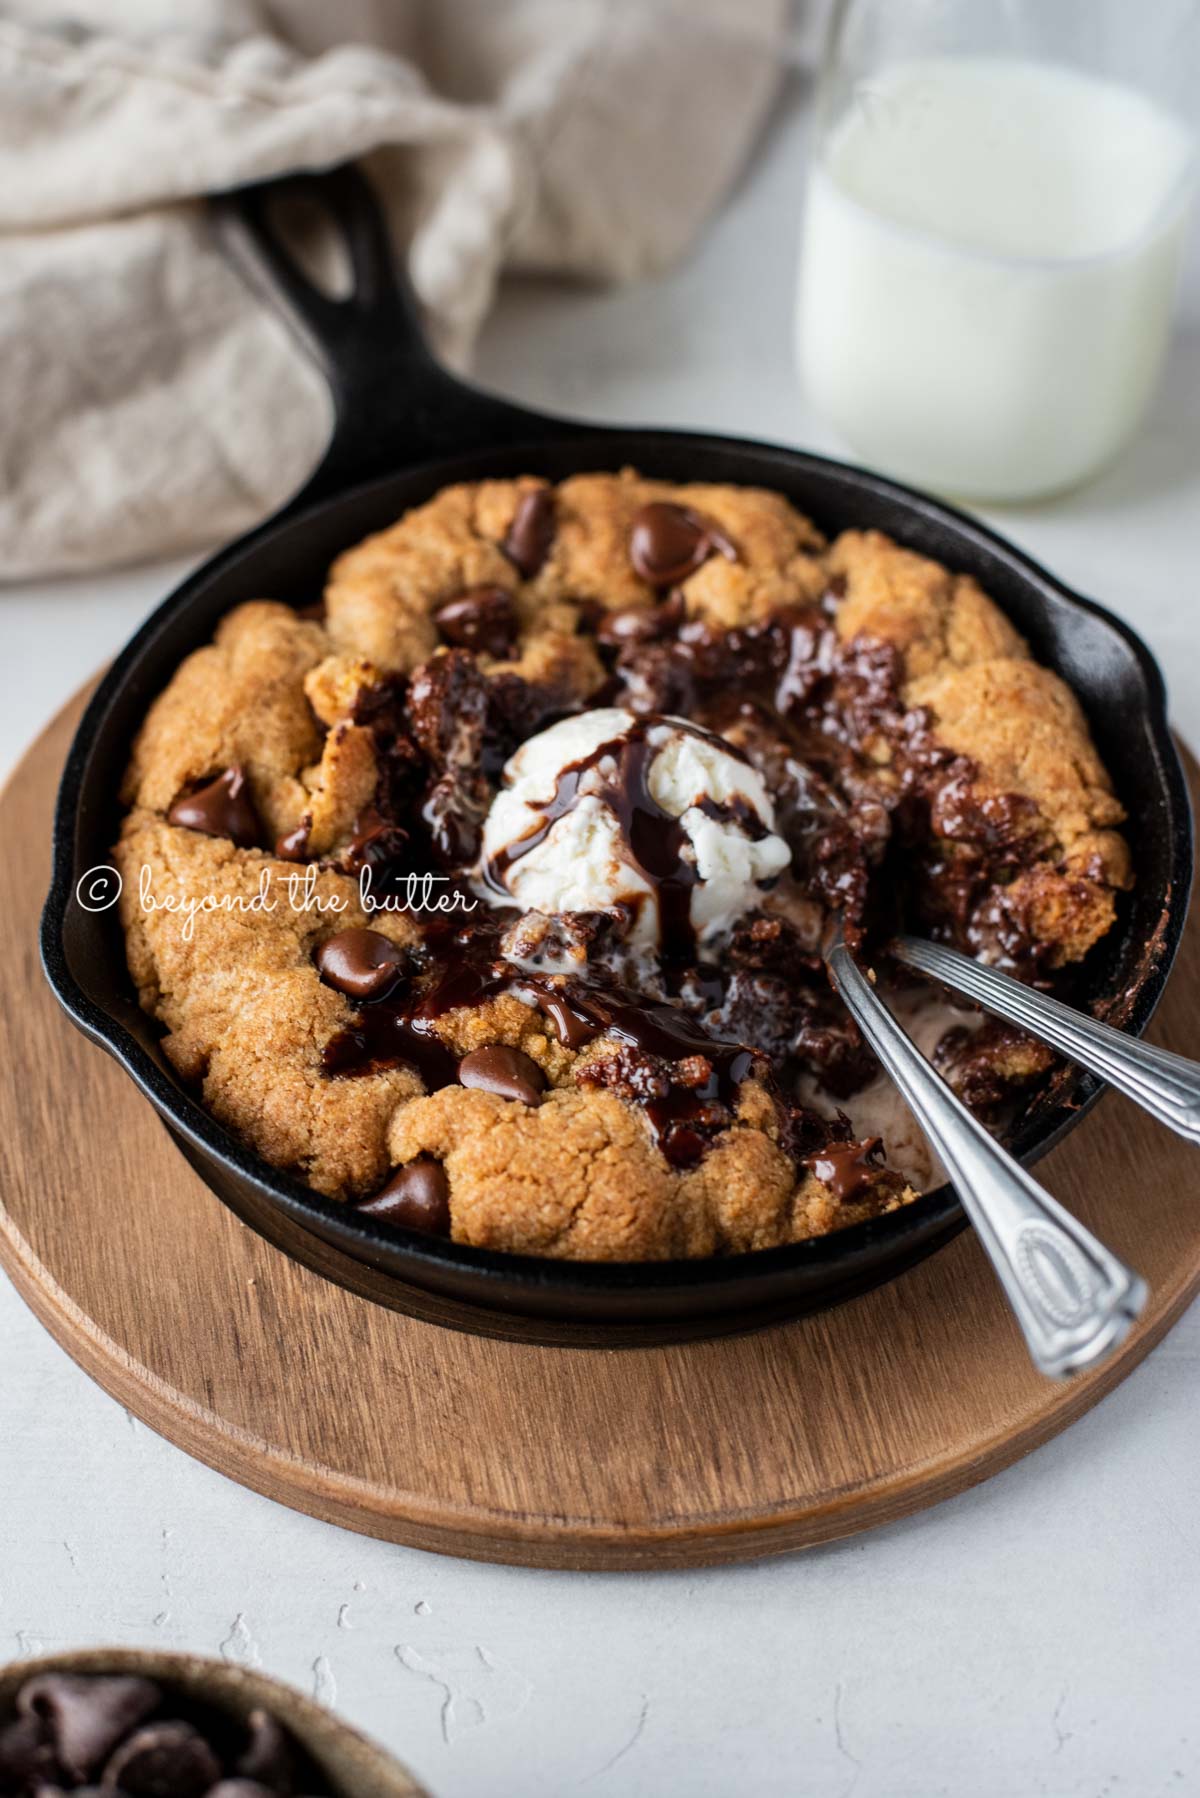 Warm chocolate chip skillet cookie with scoop of vanilla ice cream and two spoons resting in skillet on wood trivet  | All Images © Beyond the Butter®